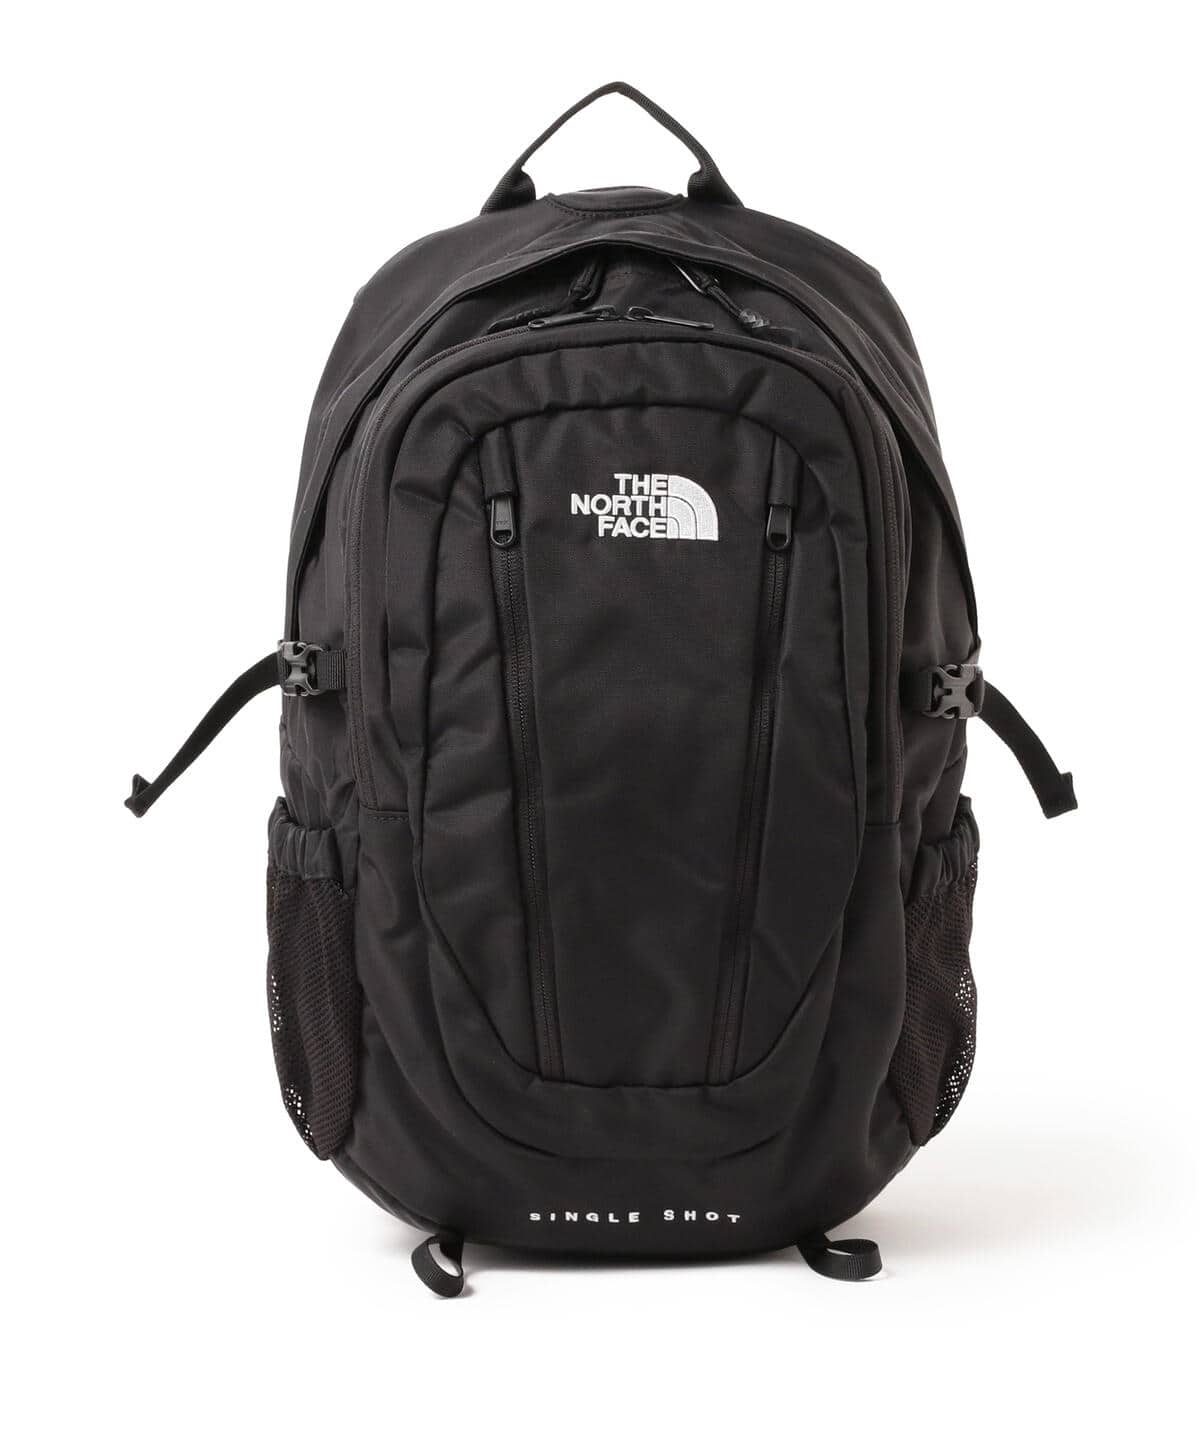 THE NORTH FACE SINGLE SHOT